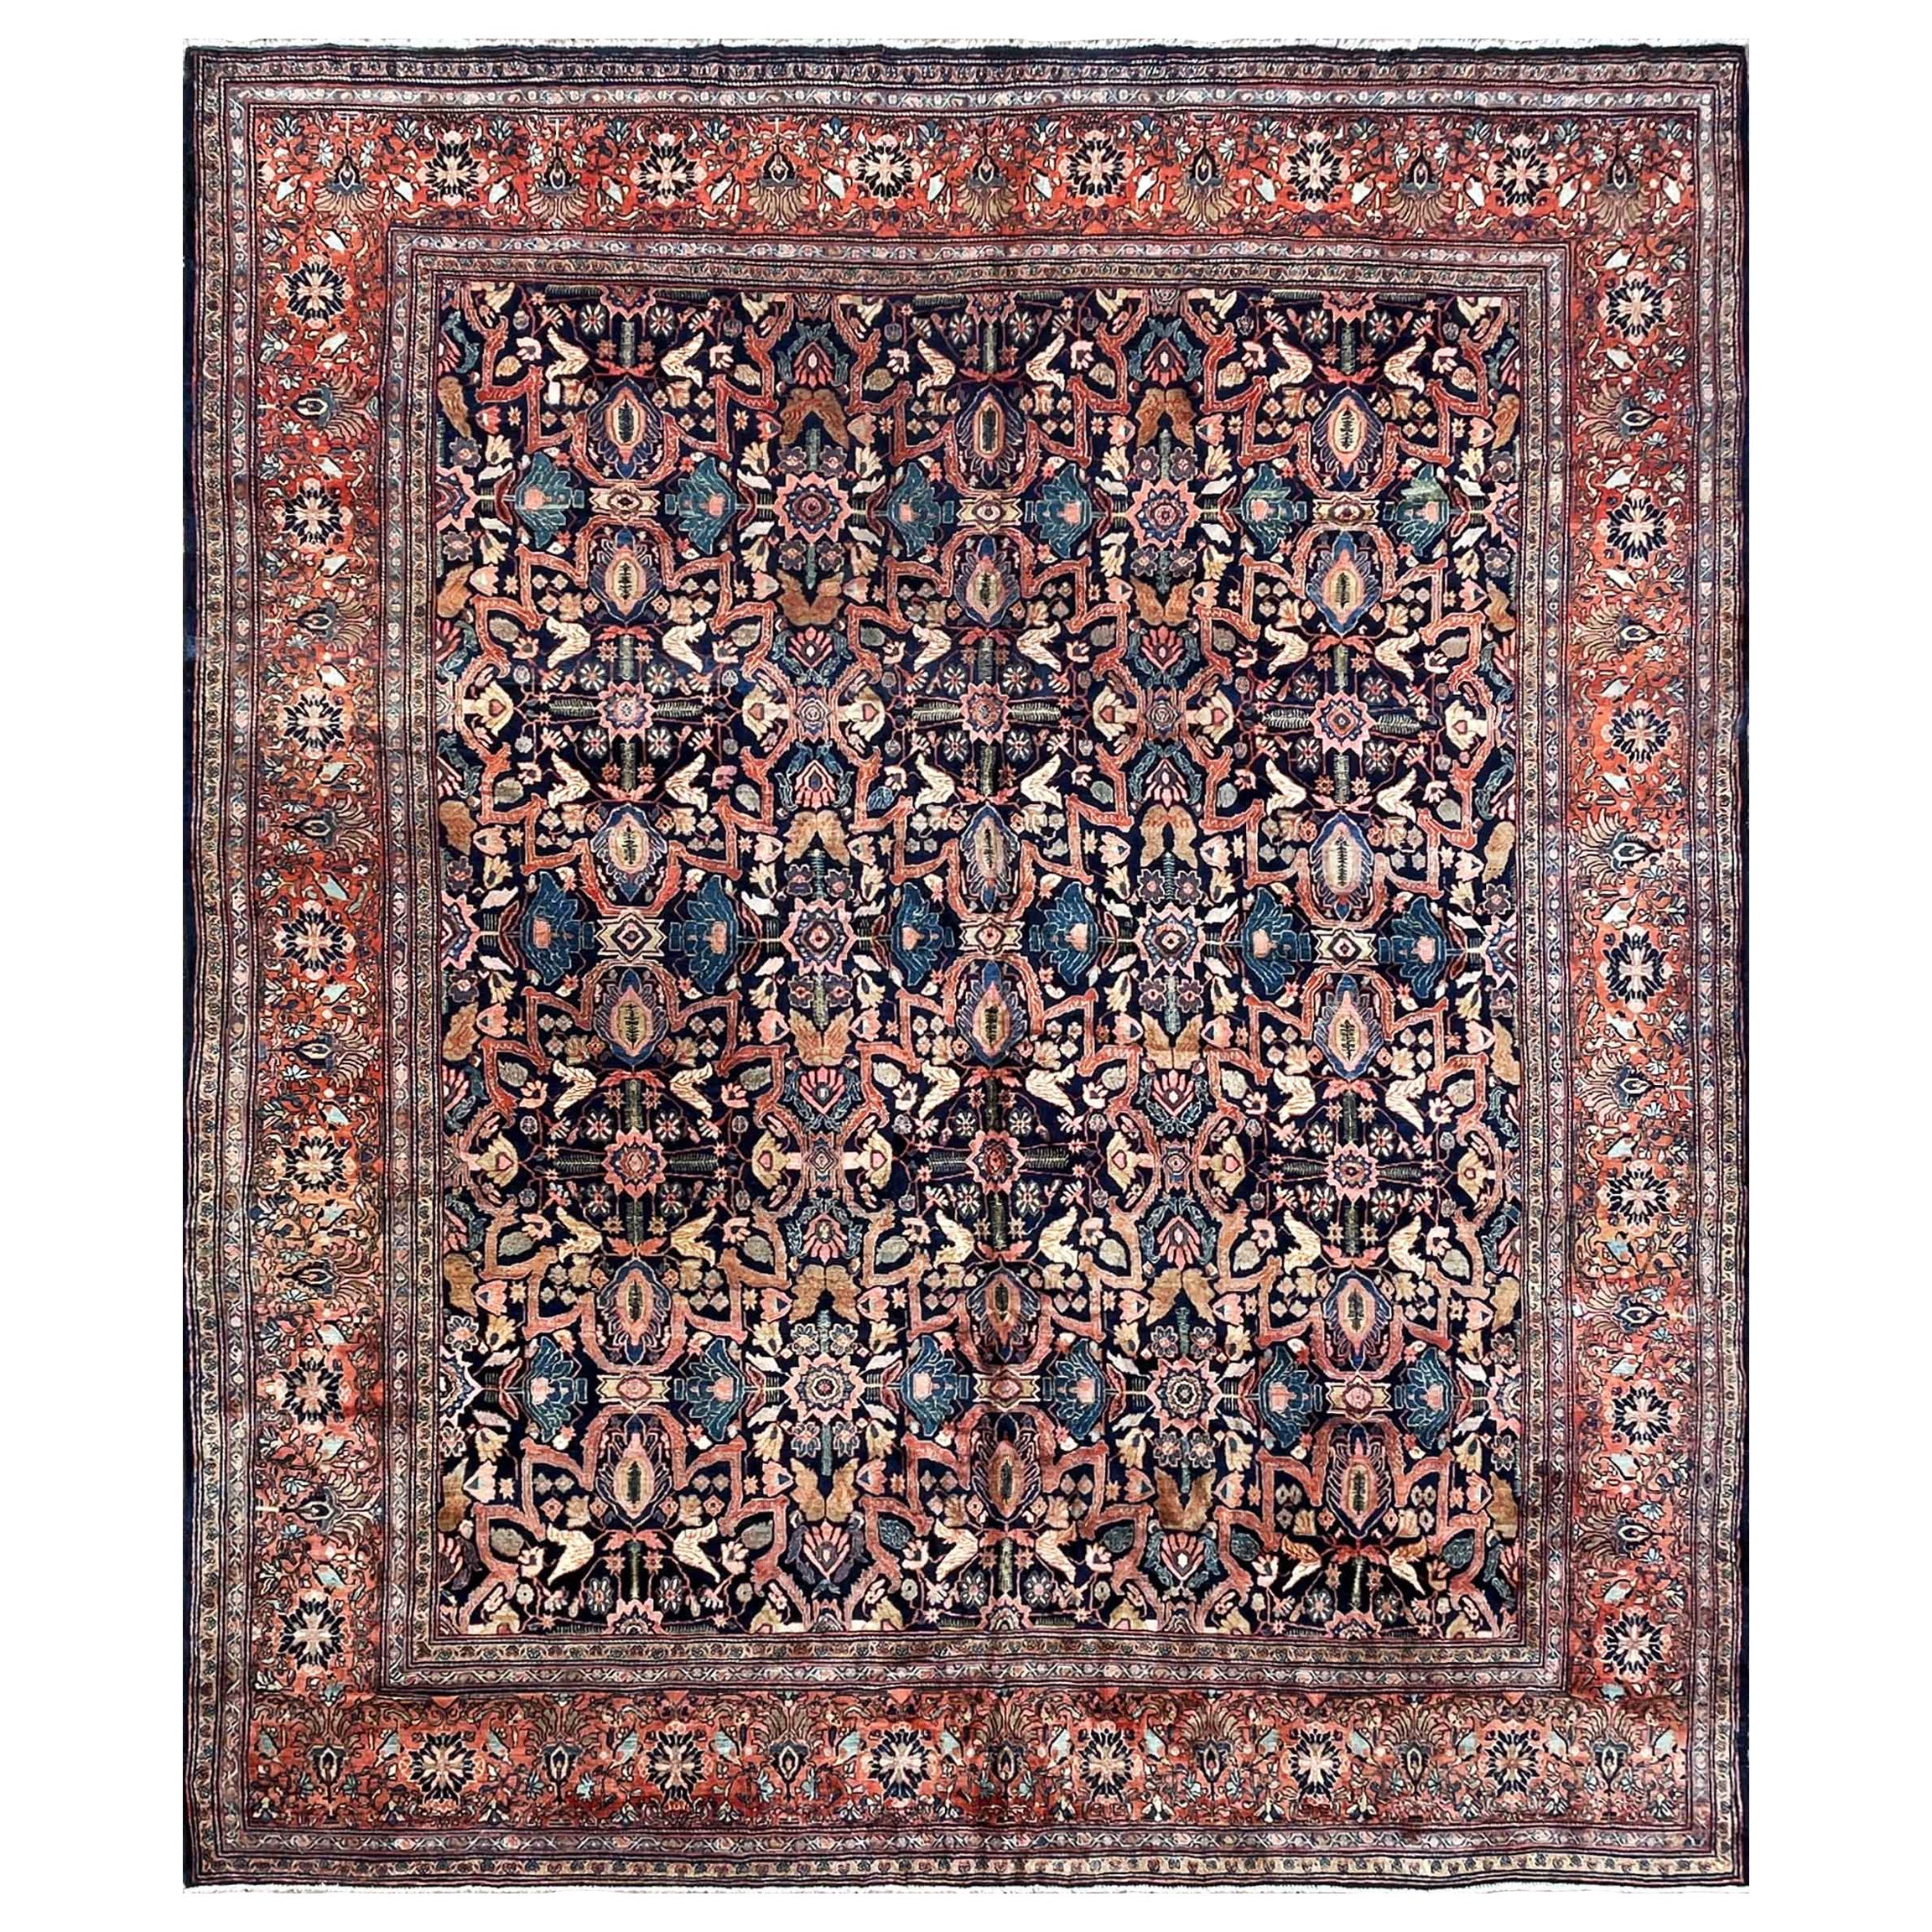 Antique Persian Feraghan Sarouk, The Most unusual For Sale